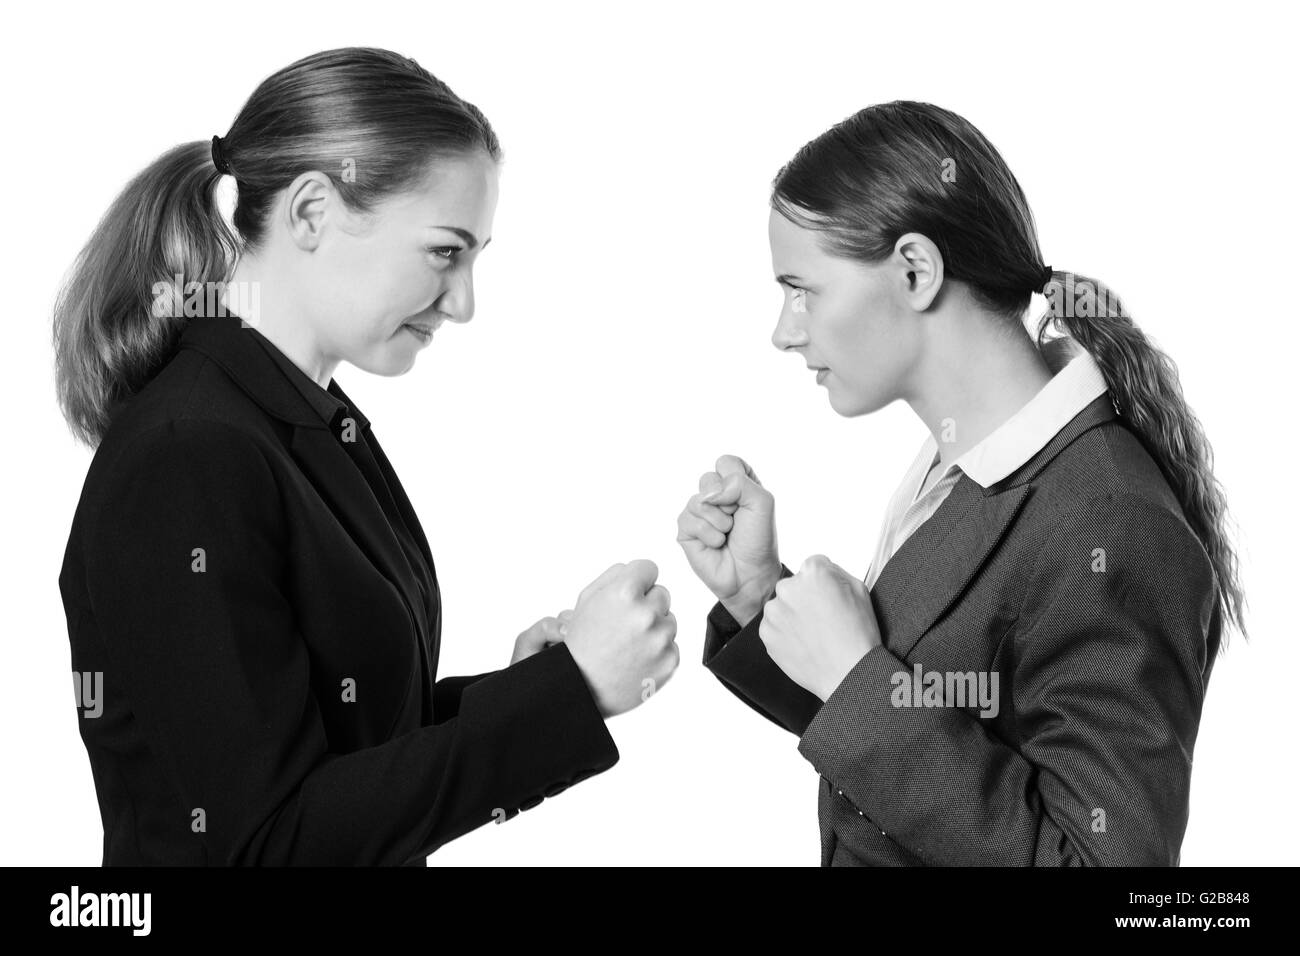 Studio shot of two business women with their fists raised, ready for a fight. Isolated on White. Stock Photo